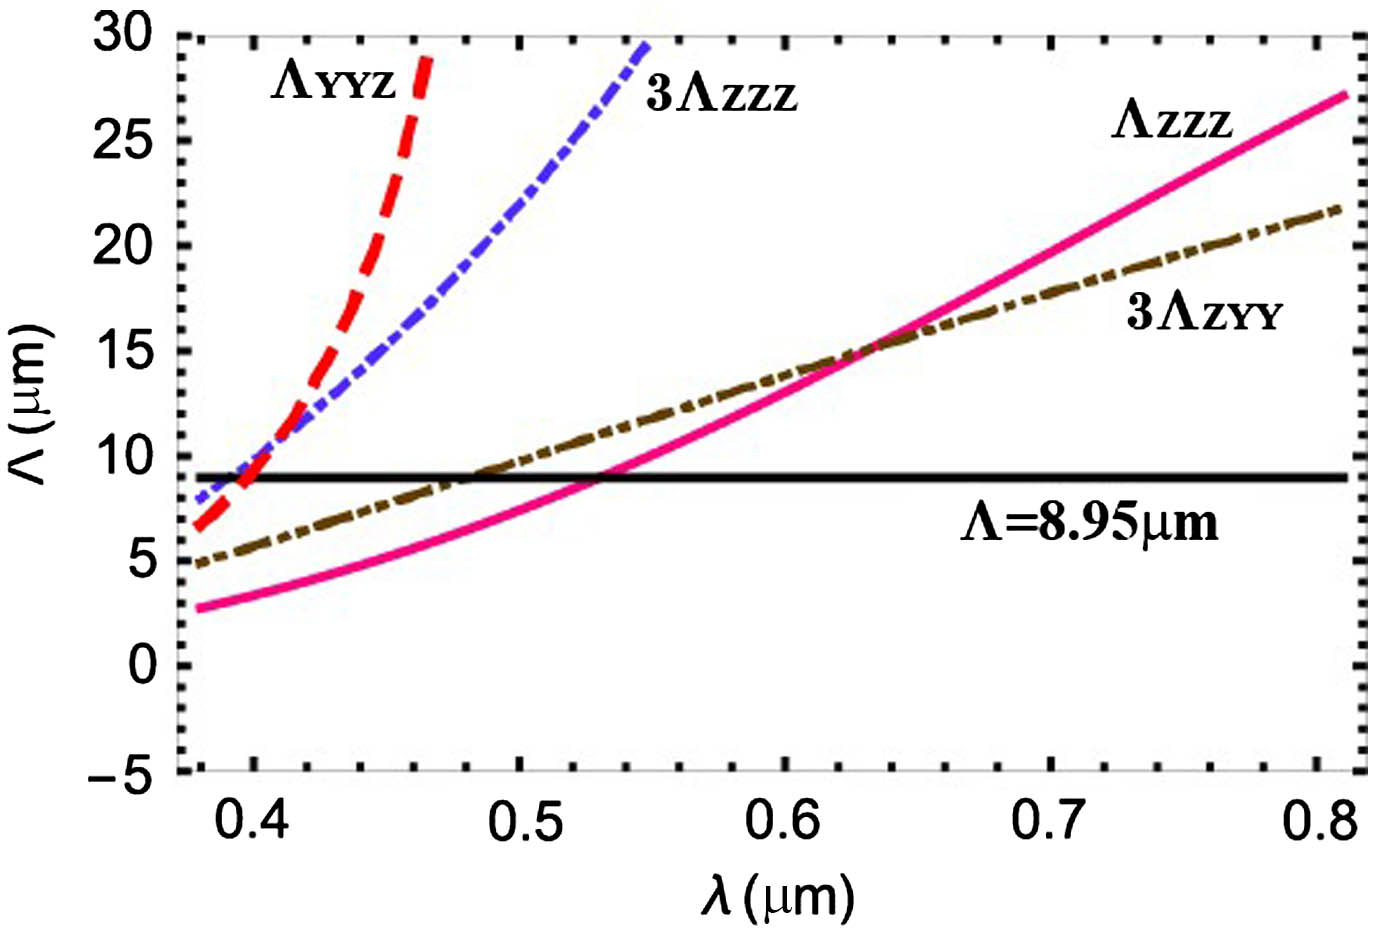 Numerical simulations of poling period for different types and orders of QPM processes. The four named lines ΛZZZ, 3ΛZZZ, ΛYYZ, 3ΛZYY represent type-0 first-order QPM (ZZZ), type-0 third-order QPM (ZZZ), type-II first-order QPM (YYZ), and type-I third-order QPM (ZYY), respectively. Λ = 8.95 µm represents the poling period of the PPKTP crystal used for experimental testing.